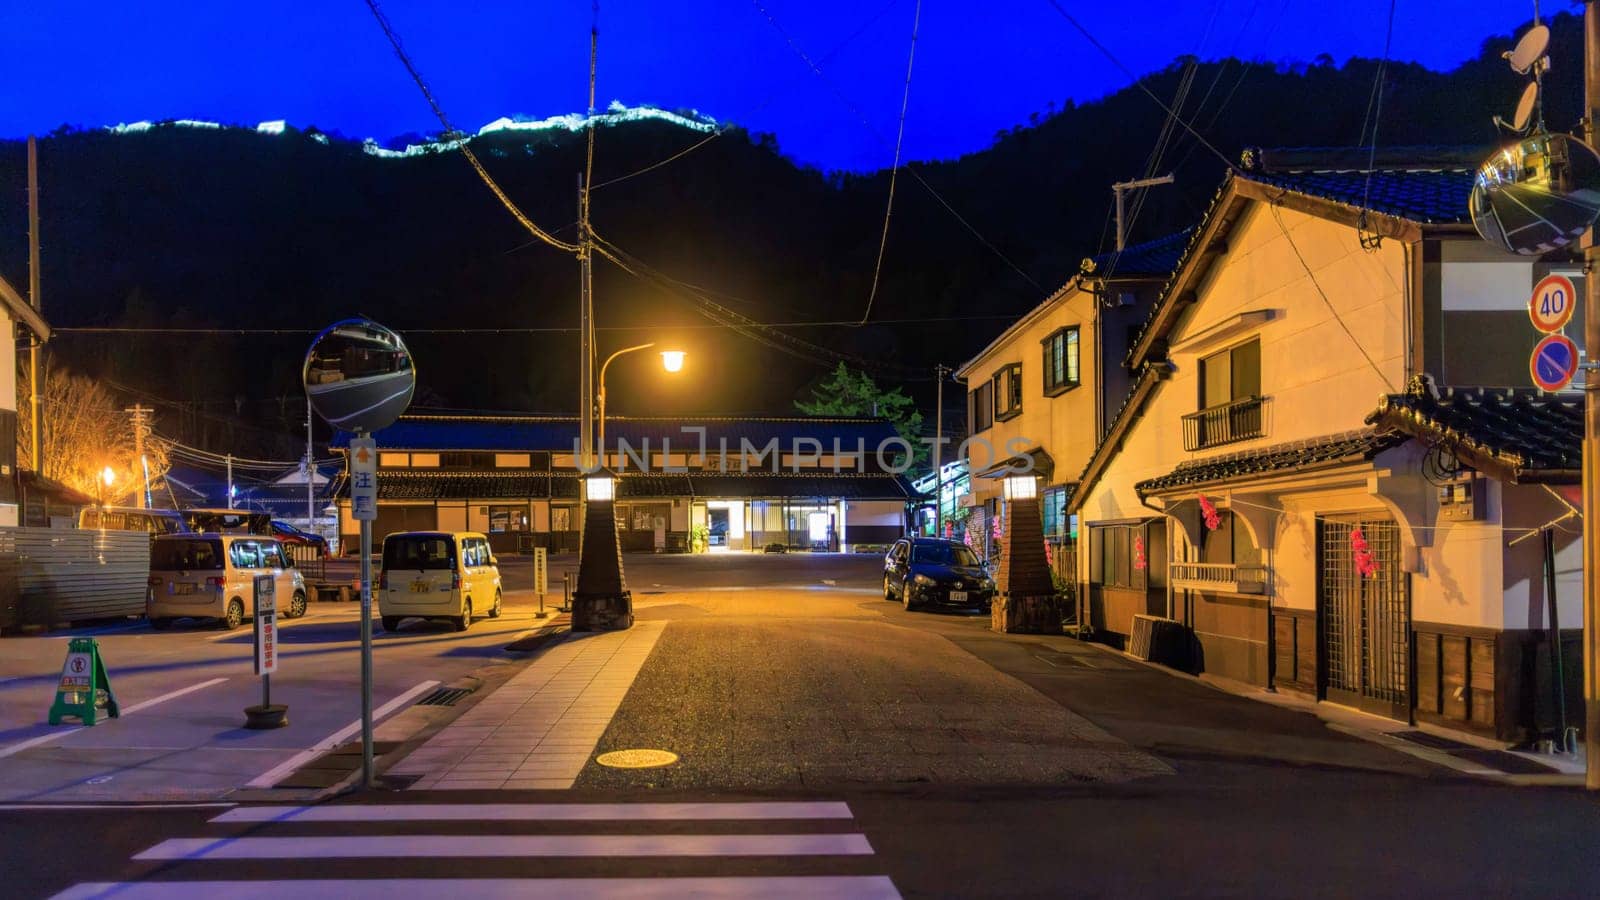 Takeda, Japan - March 28, 2023: Empty road in front of train station with castle lights on hill above by Osaze